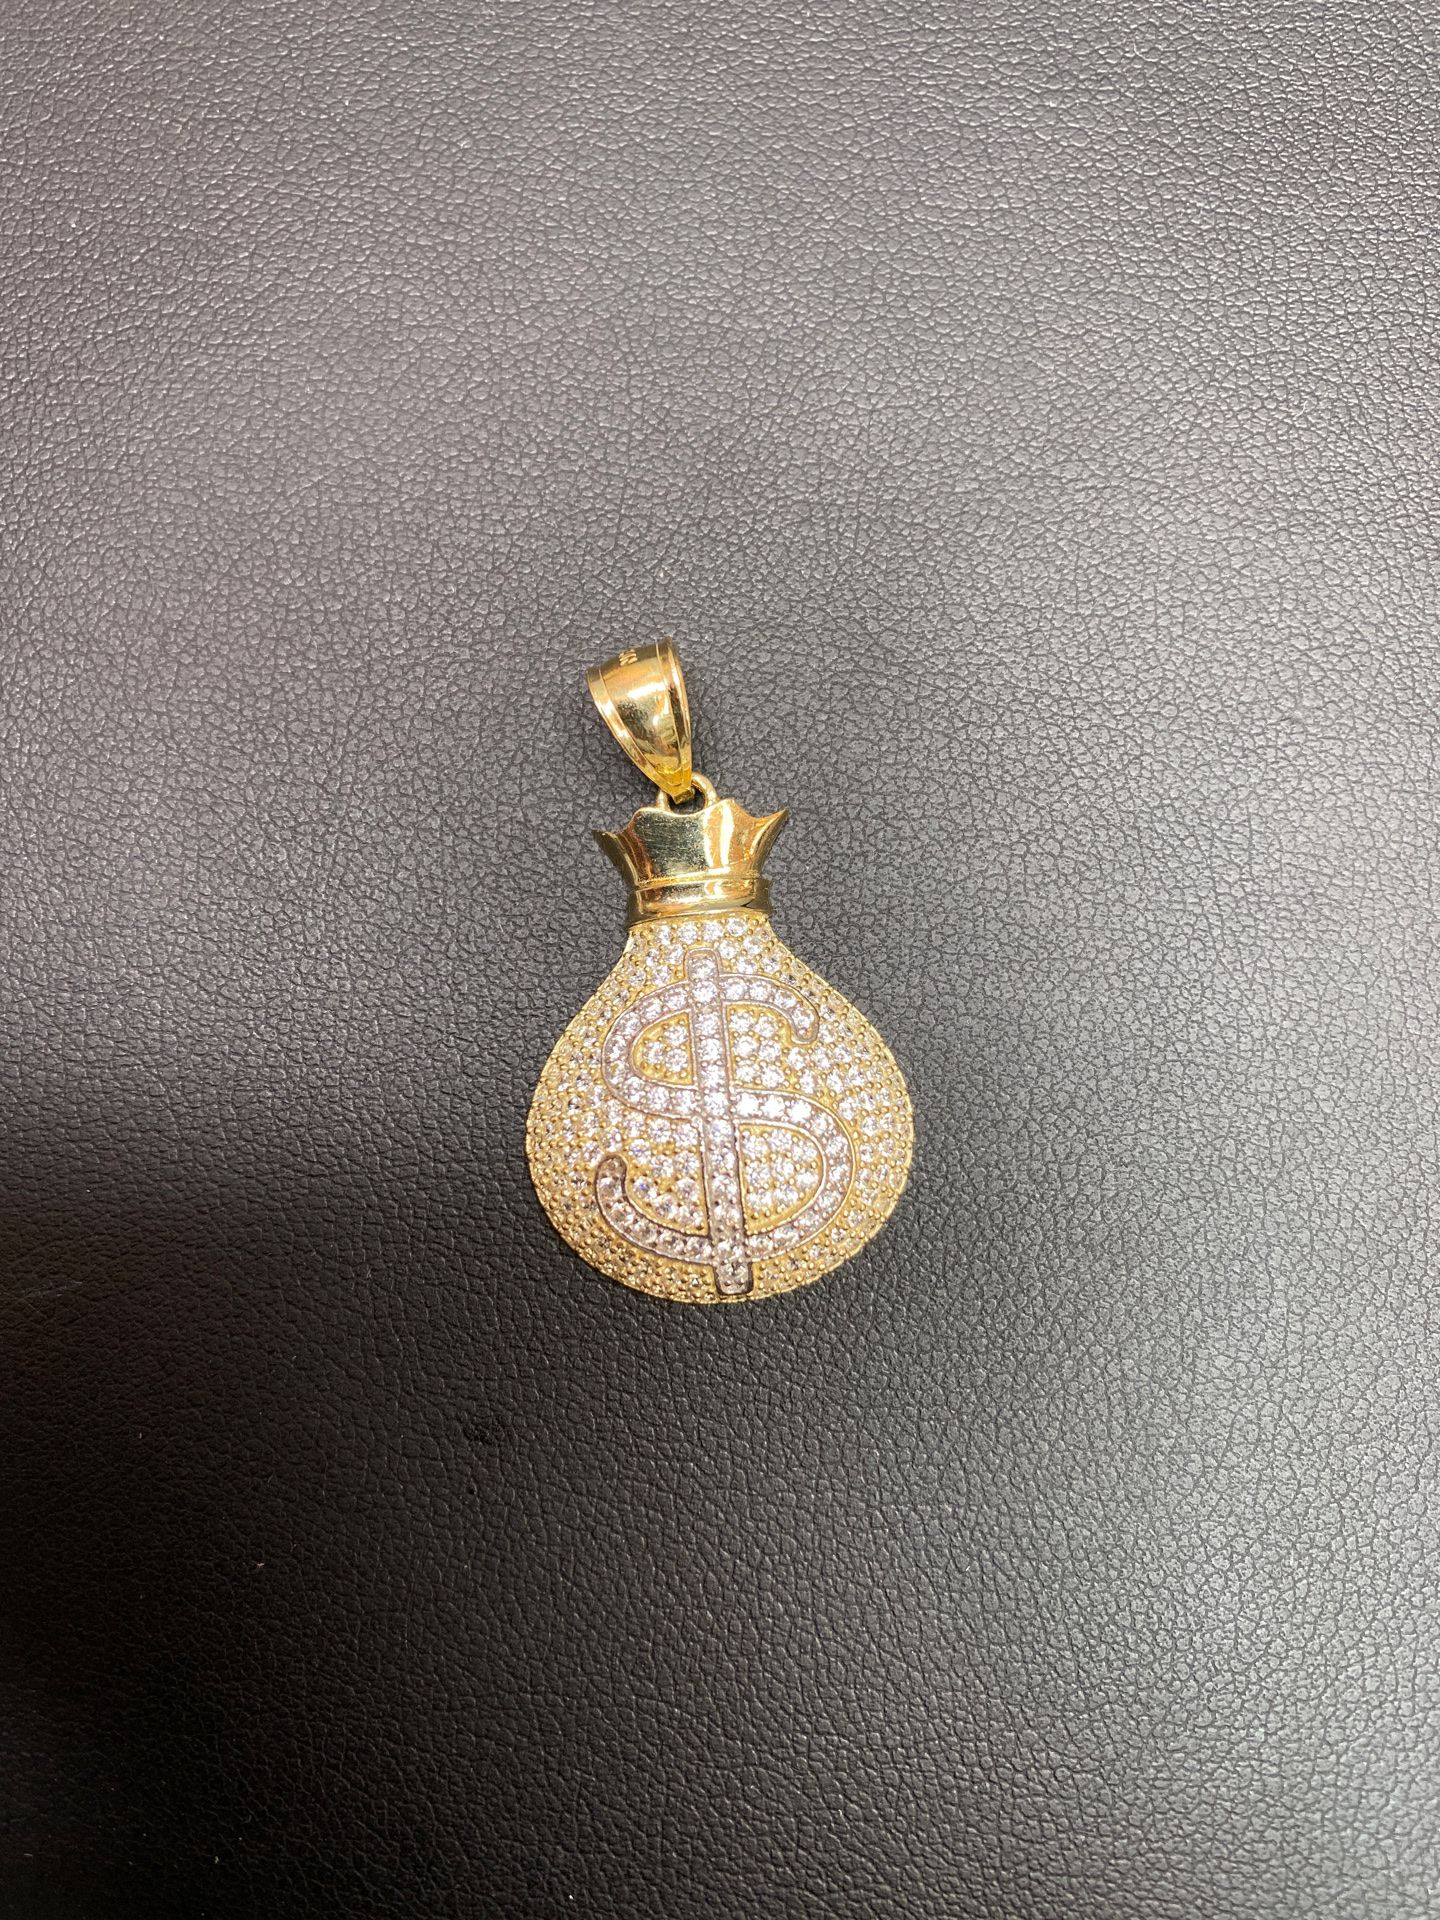 10k real solid gold pendant with Crystals. 1.25” high